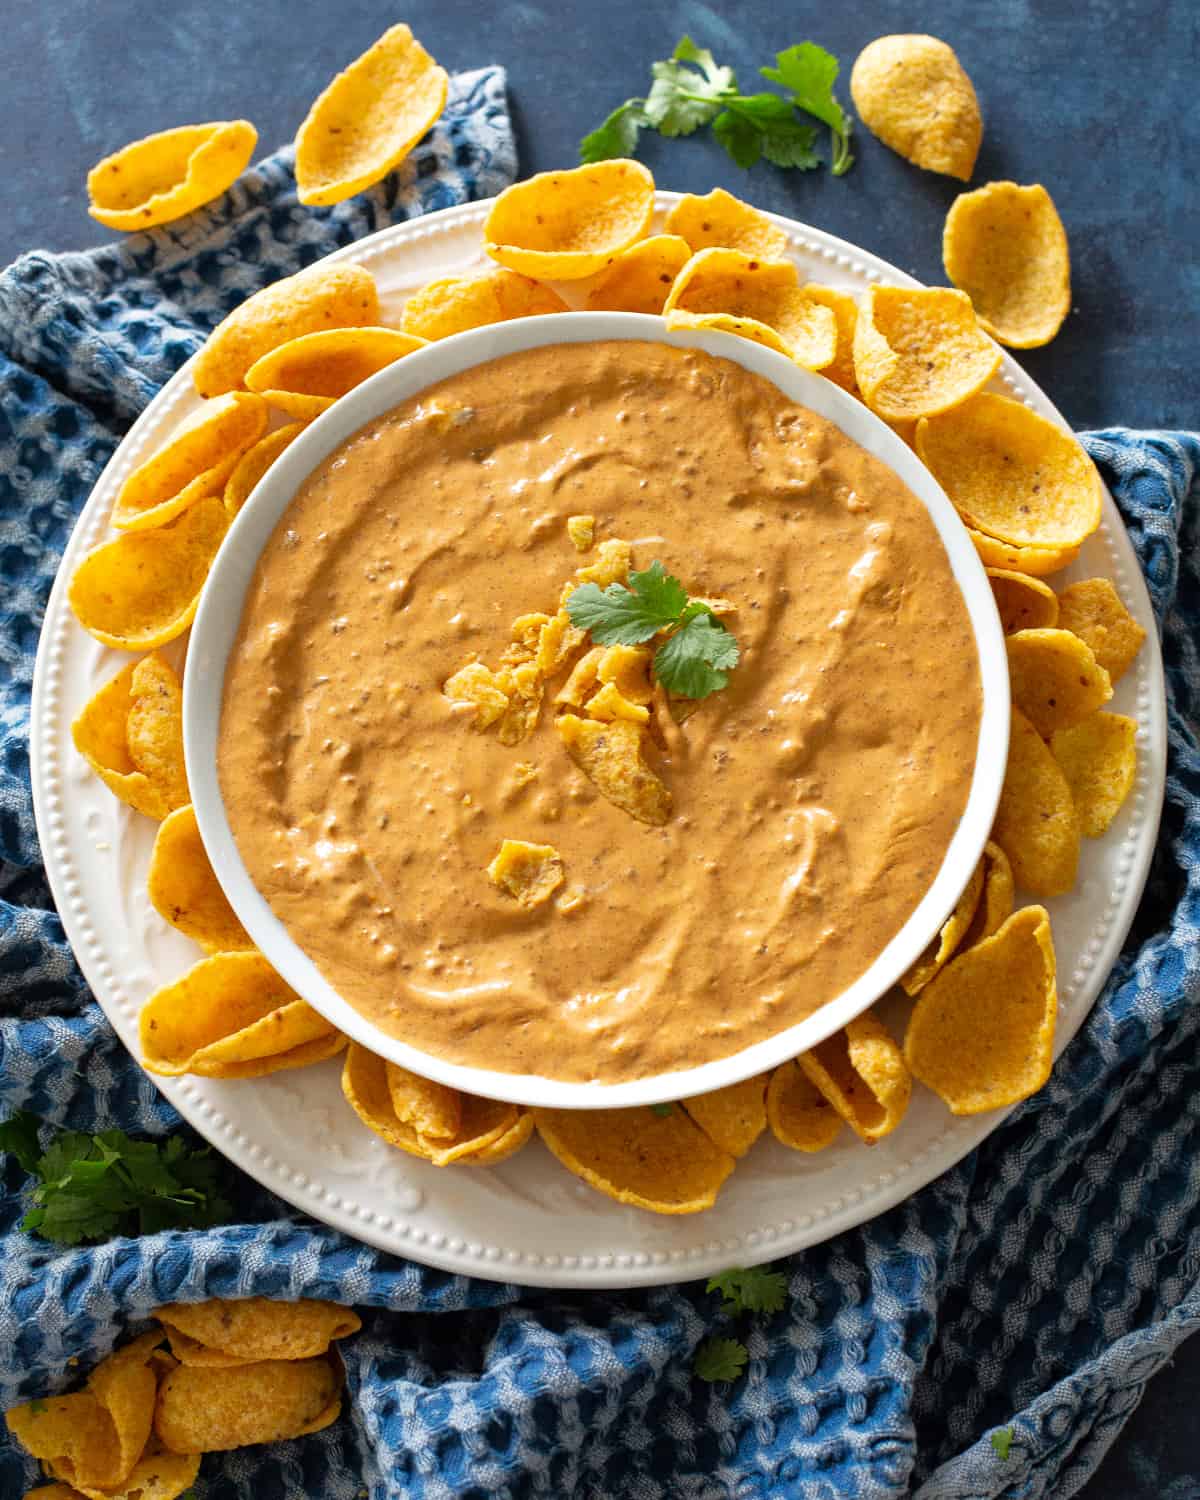 chili cheese dip in a bowl